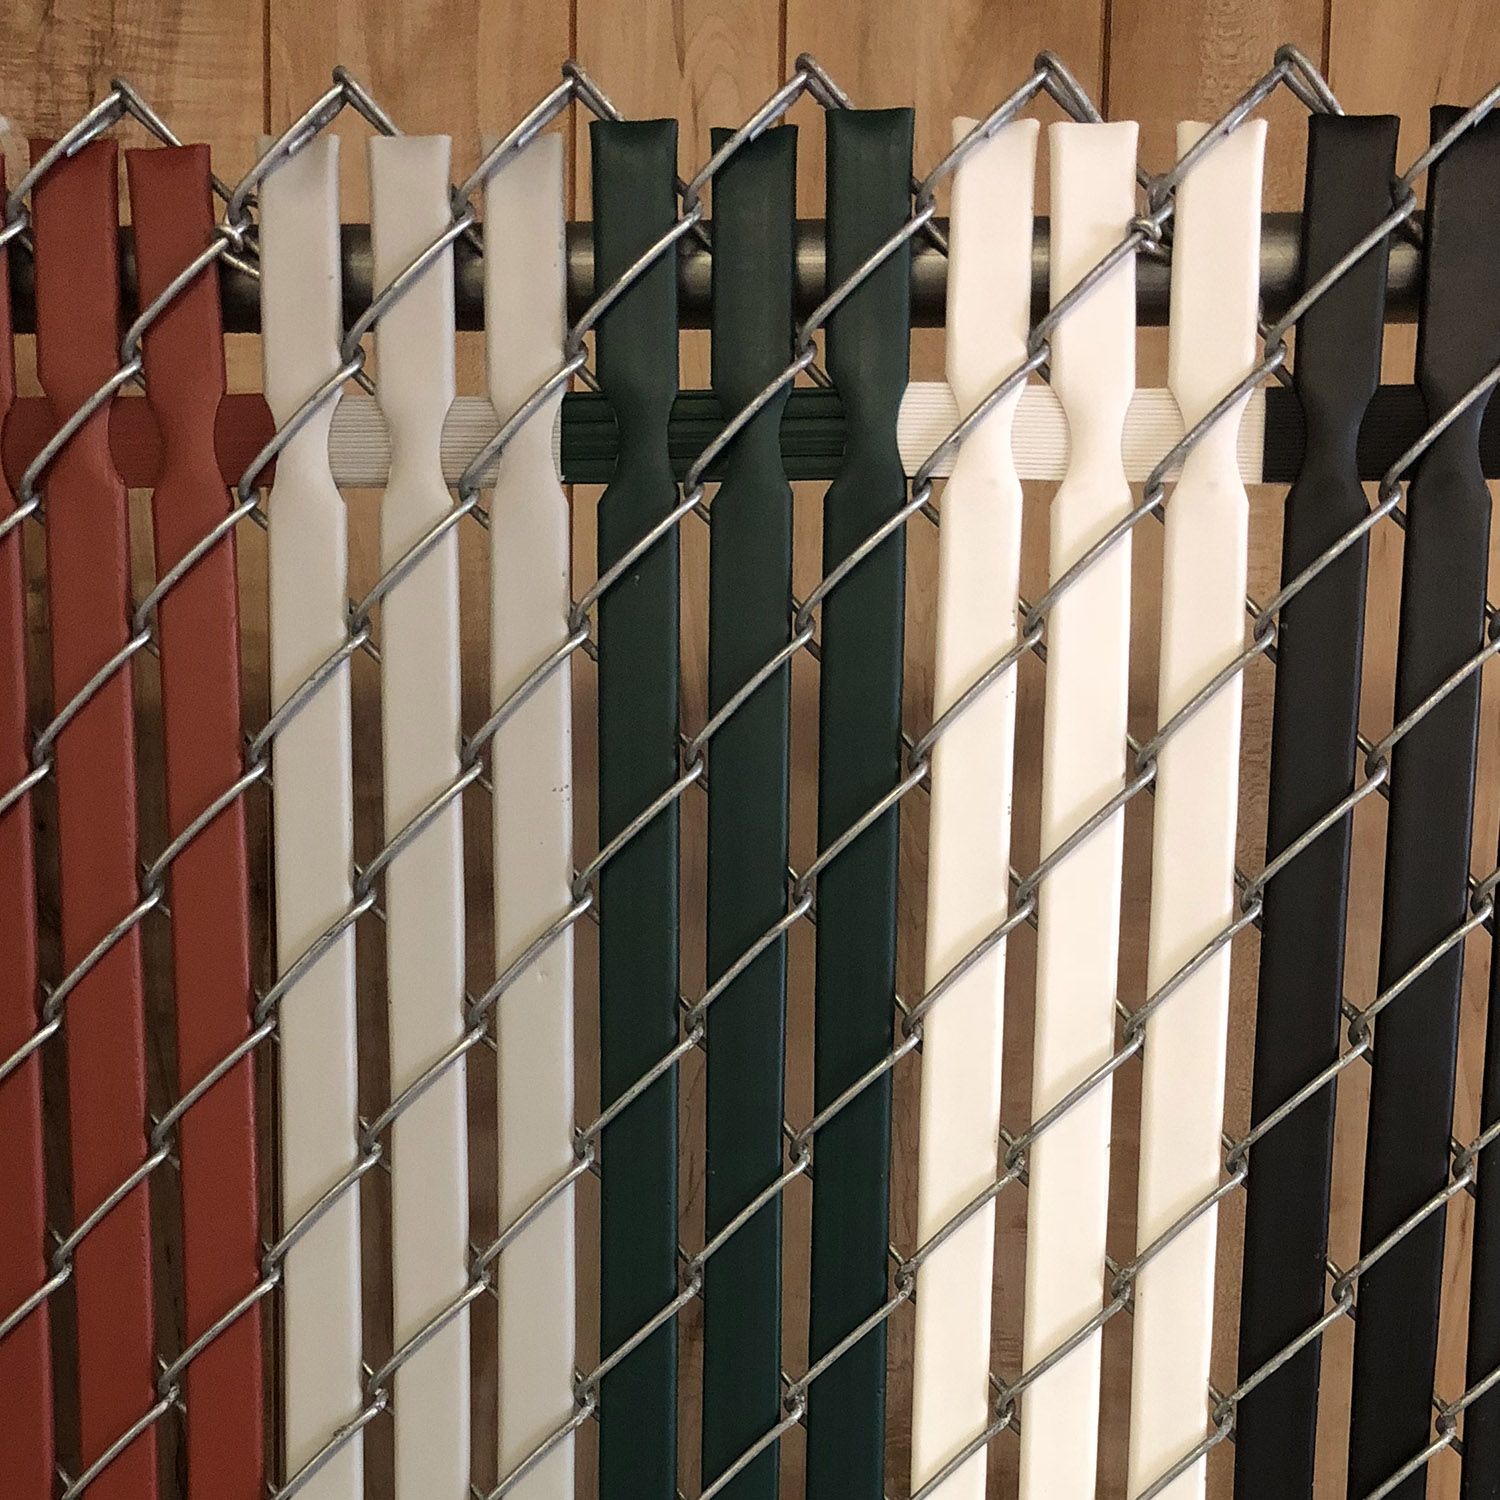 Pexco PDS Top Lock Privacy Slats for Chain Link Fence | Hoover Fence Co.